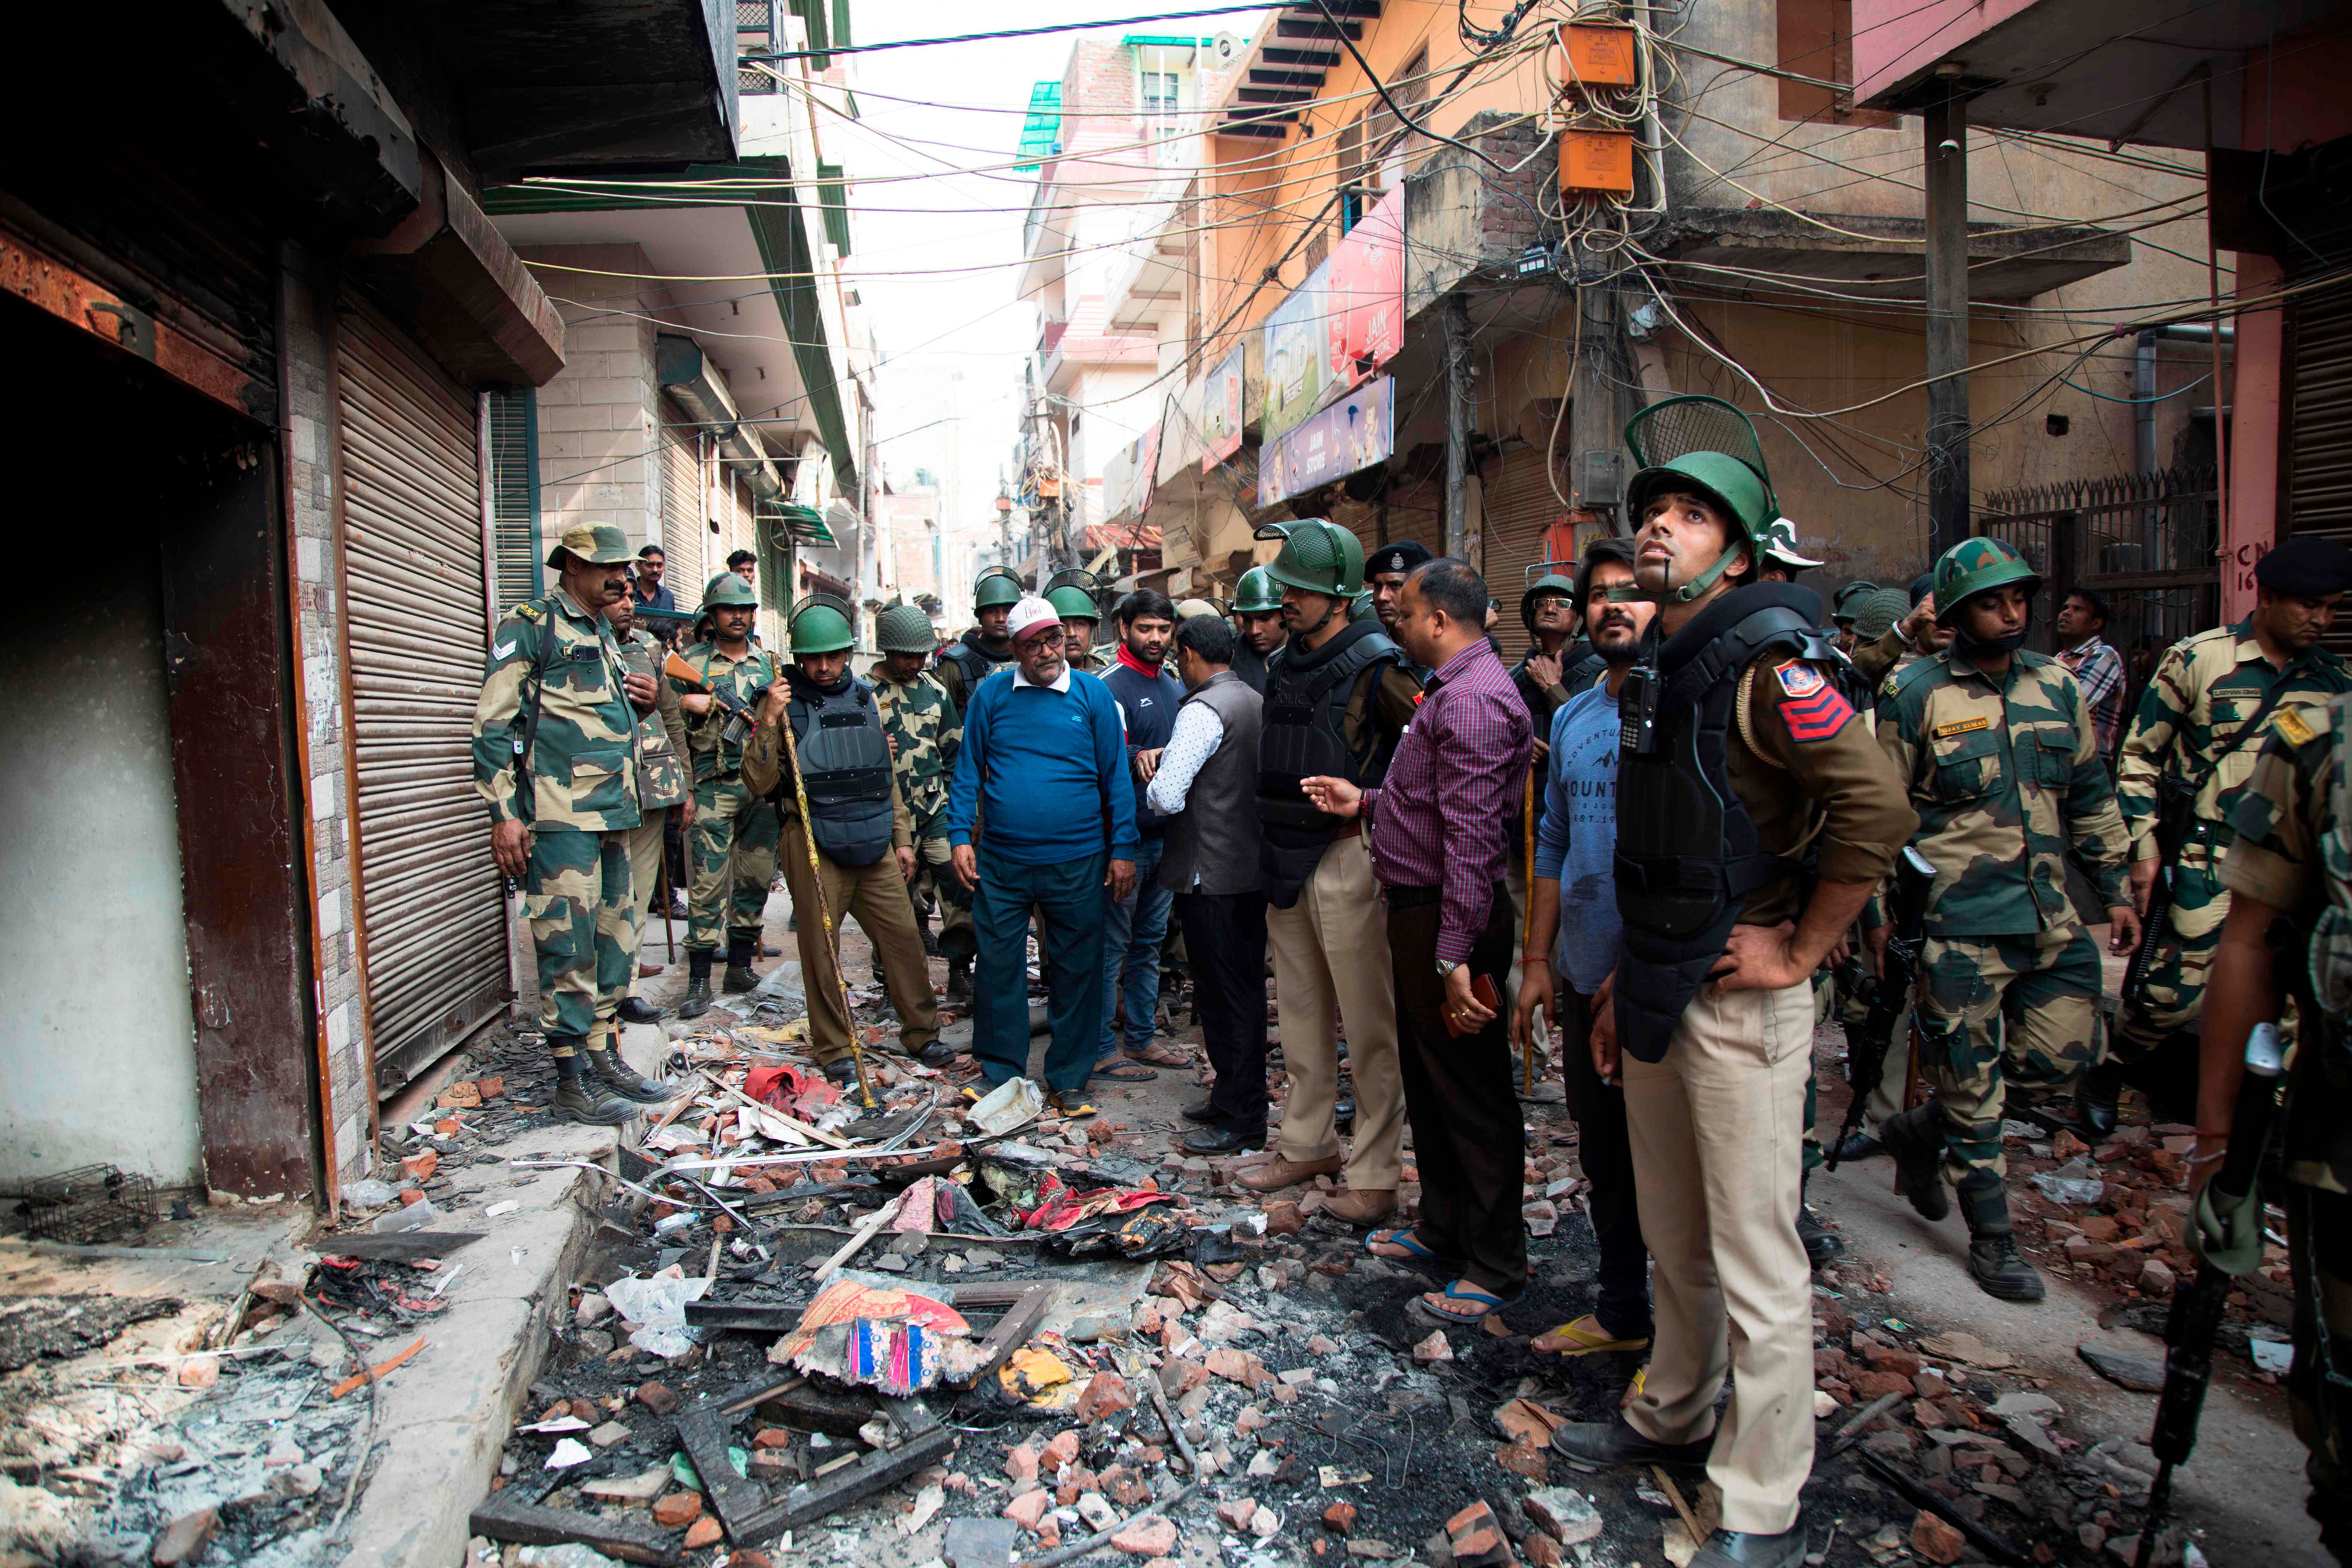 Hindu residents talk to security personnel about material damages done to properties in their neighbourhood following sectarian riots over India's new citizenship law, at Shiv Vihar area in New Delhi. (AFP Photo)